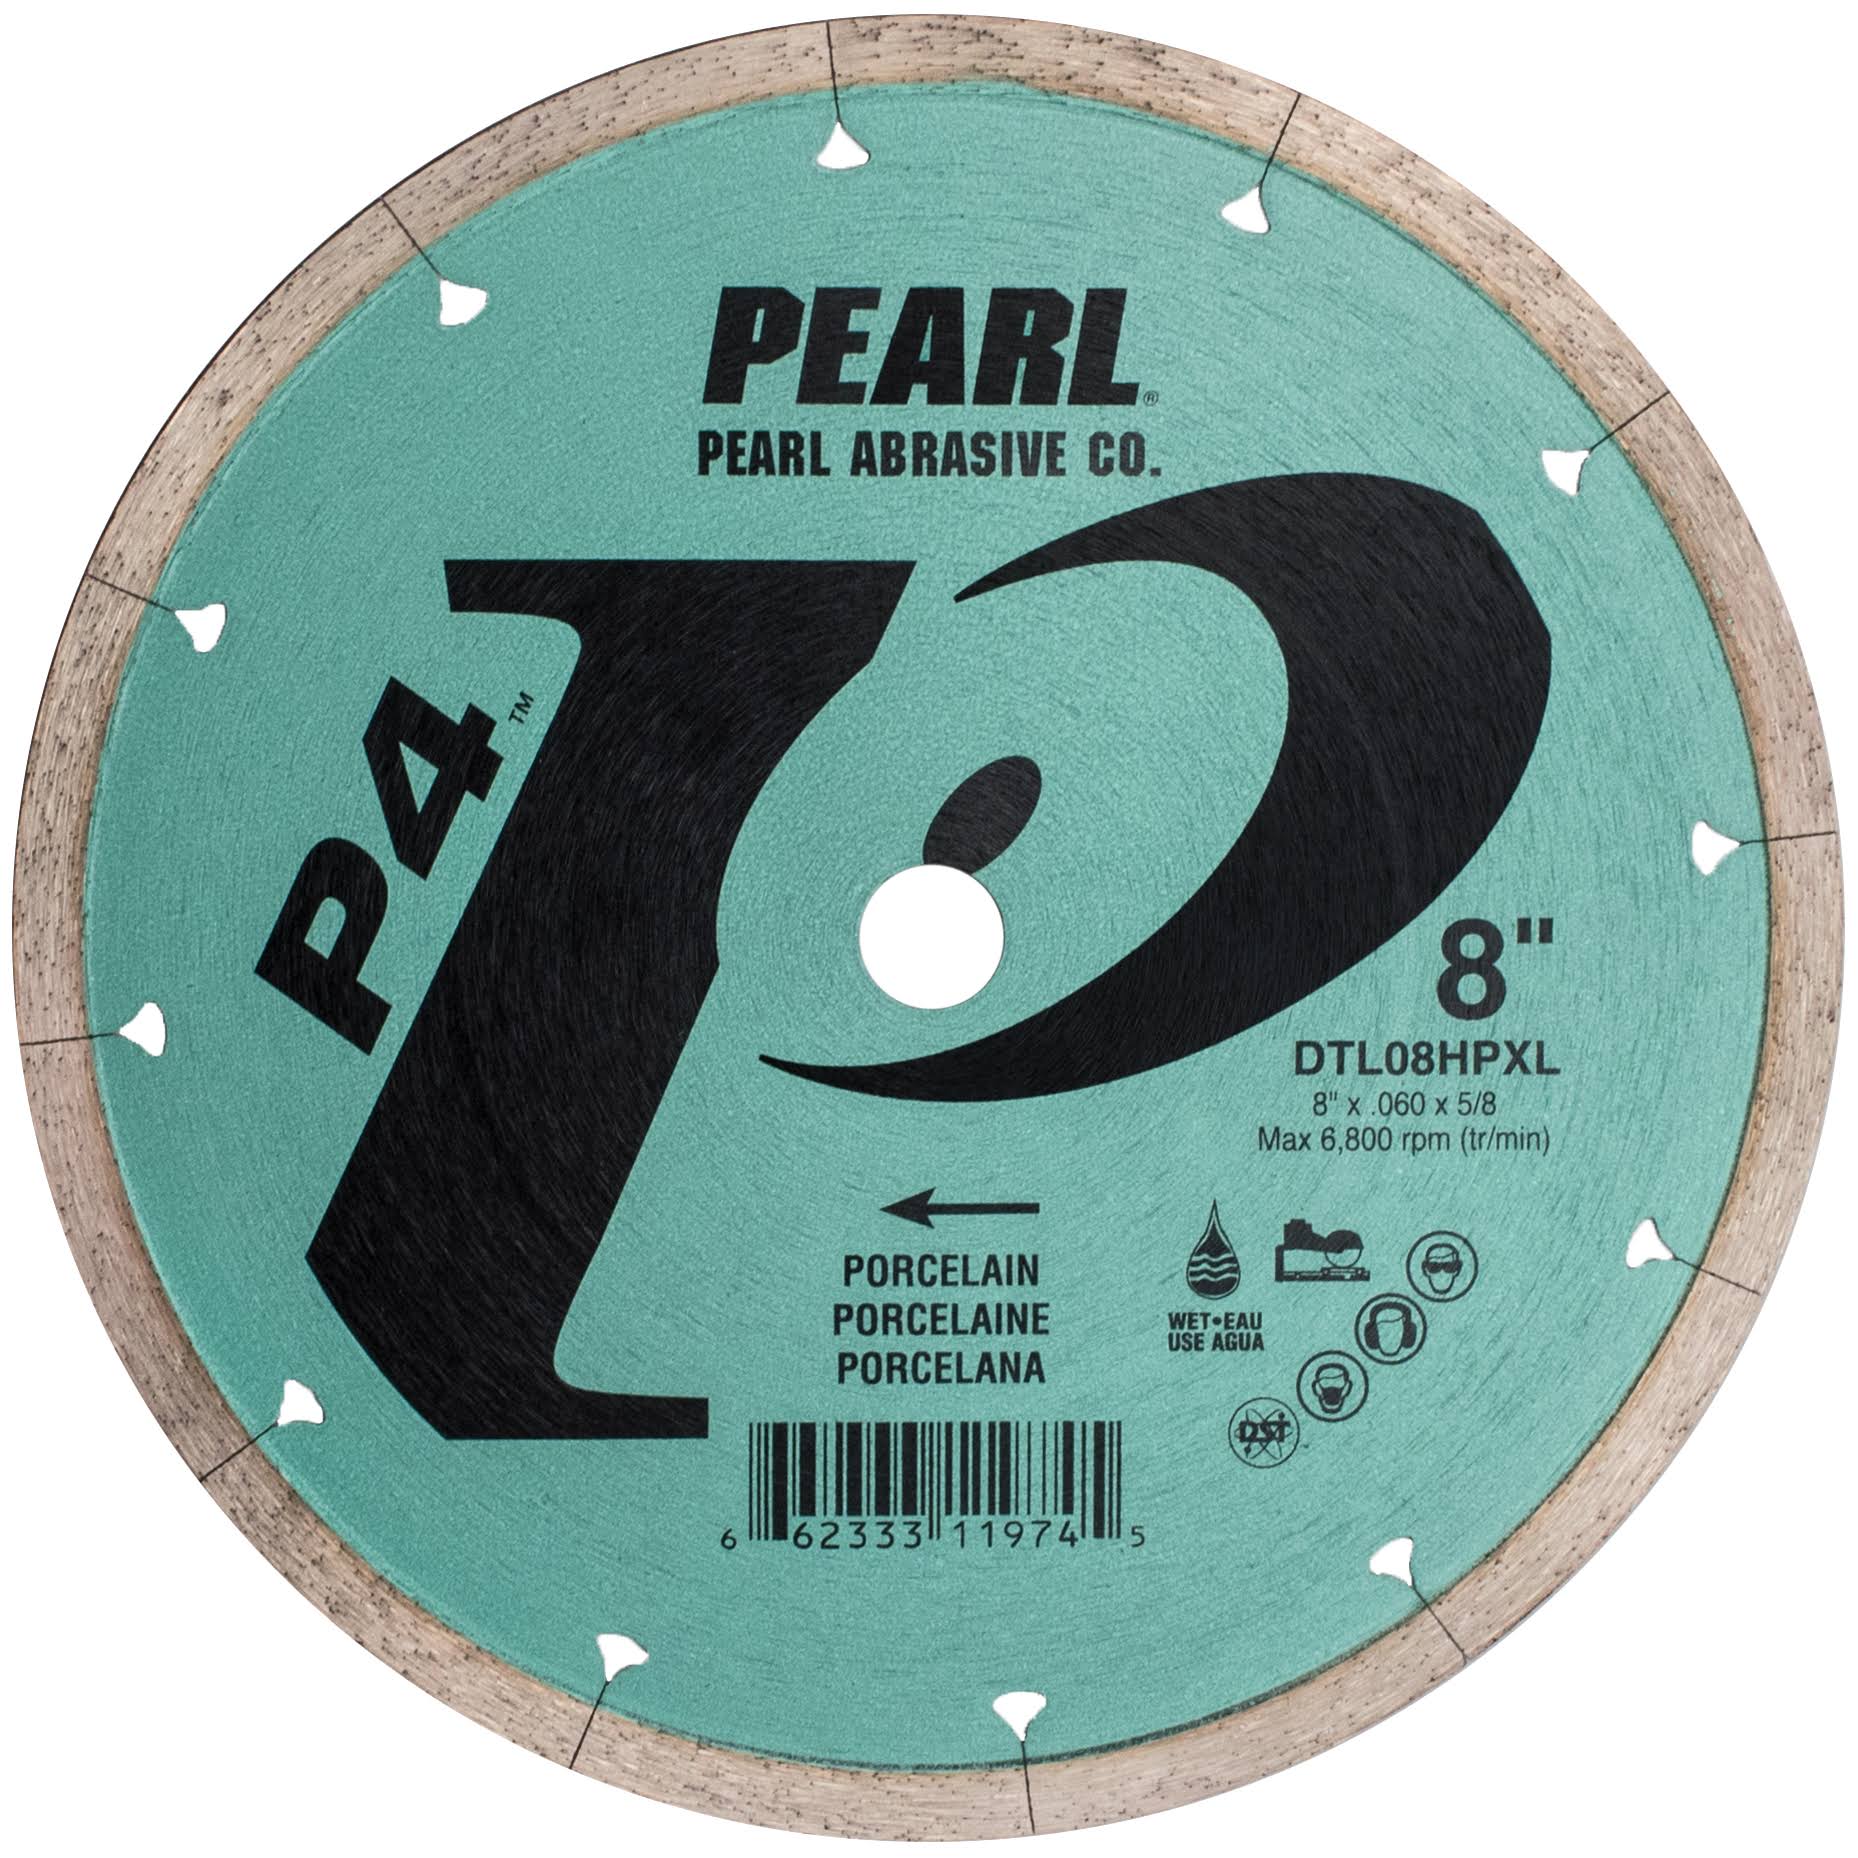 Pearl Abrasive P4 DTL10HPXL Tile and Stone Blade for Porcelain 10 x .060 x 5/8